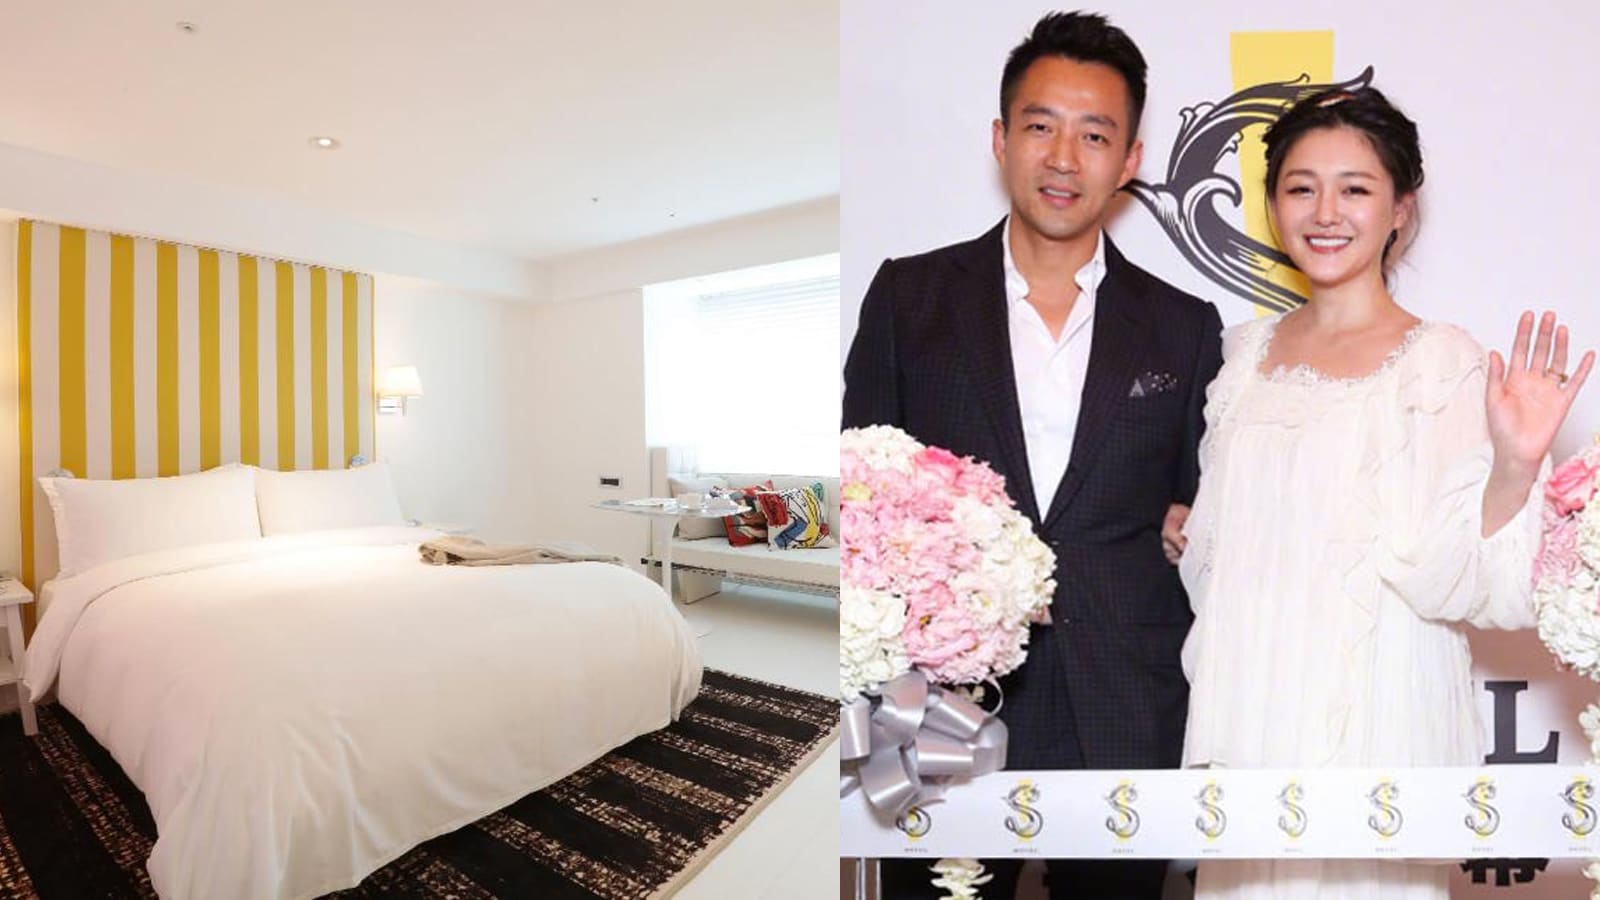 Barbie Hsu’s Husband’s Hotel Offered 'Graduation Certs' To Their Guests Who Completed Their Self-Quarantine Stay